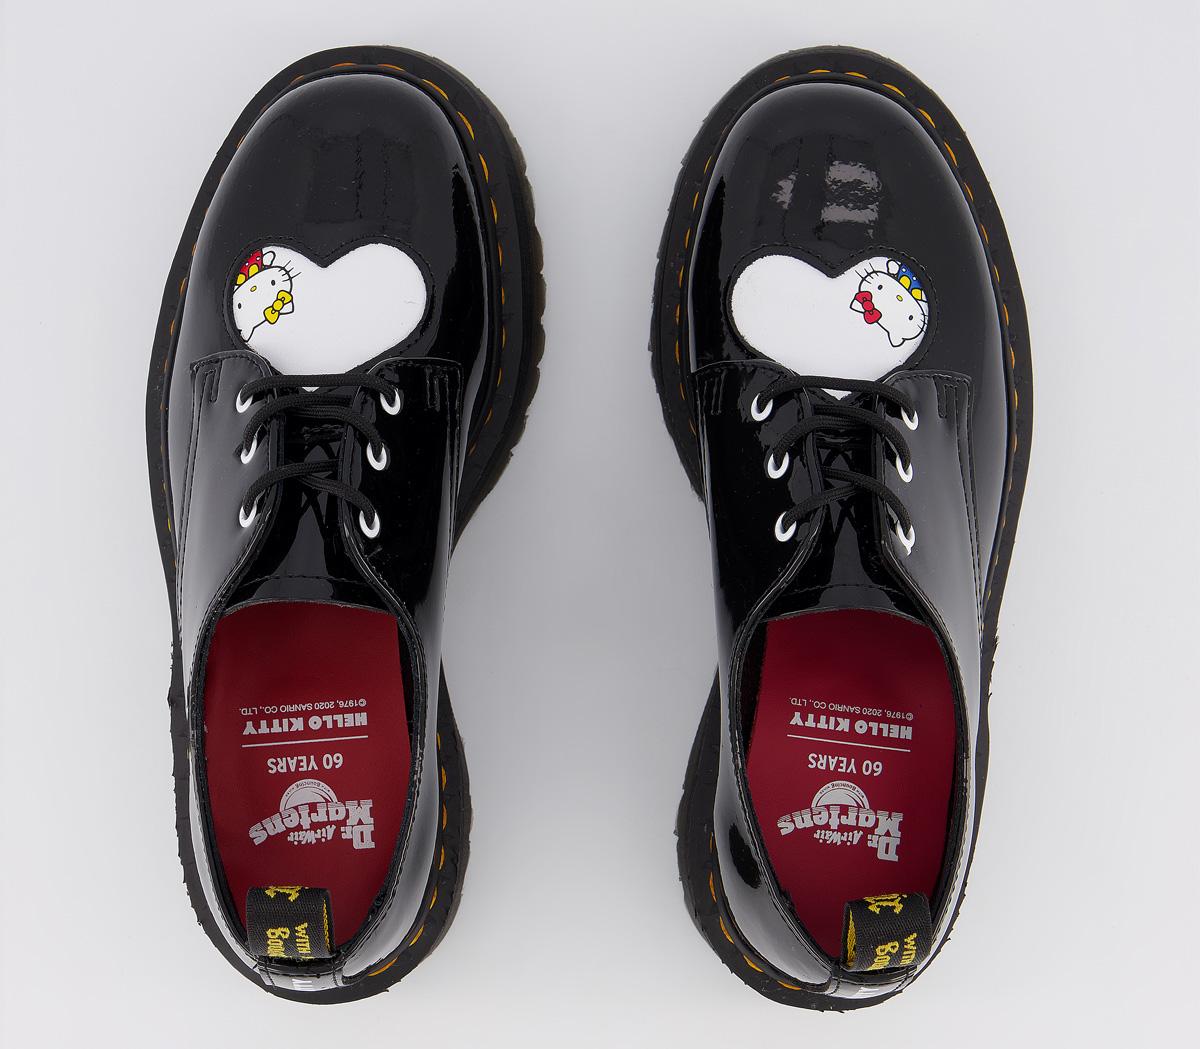 Dr. Martens Hello Kitty 1461 Quad Shoes Black - Flat Shoes for Women